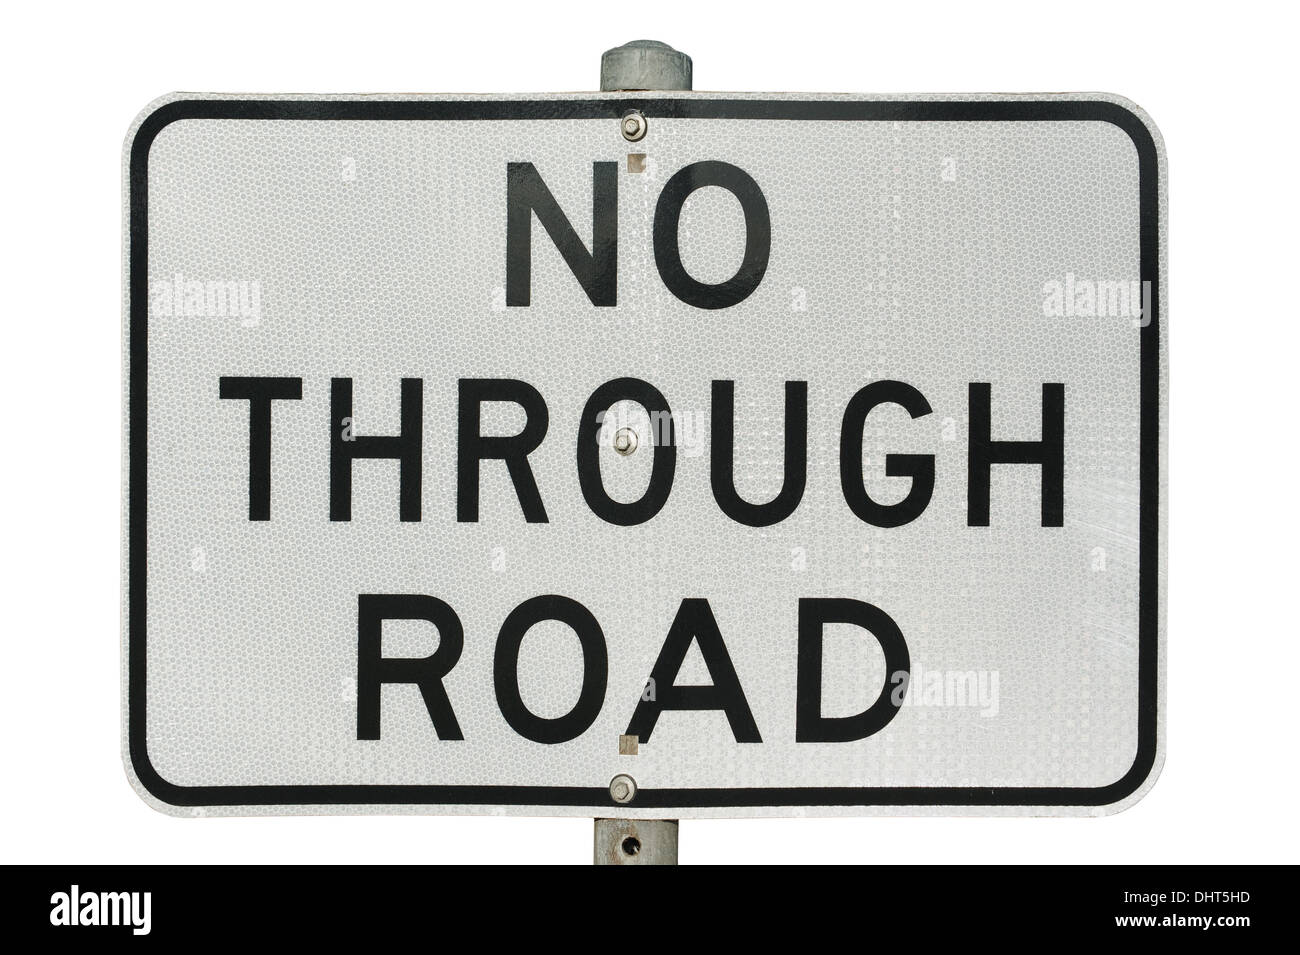 old no through road traffic sign with reflect surface isolated on a white background Stock Photo